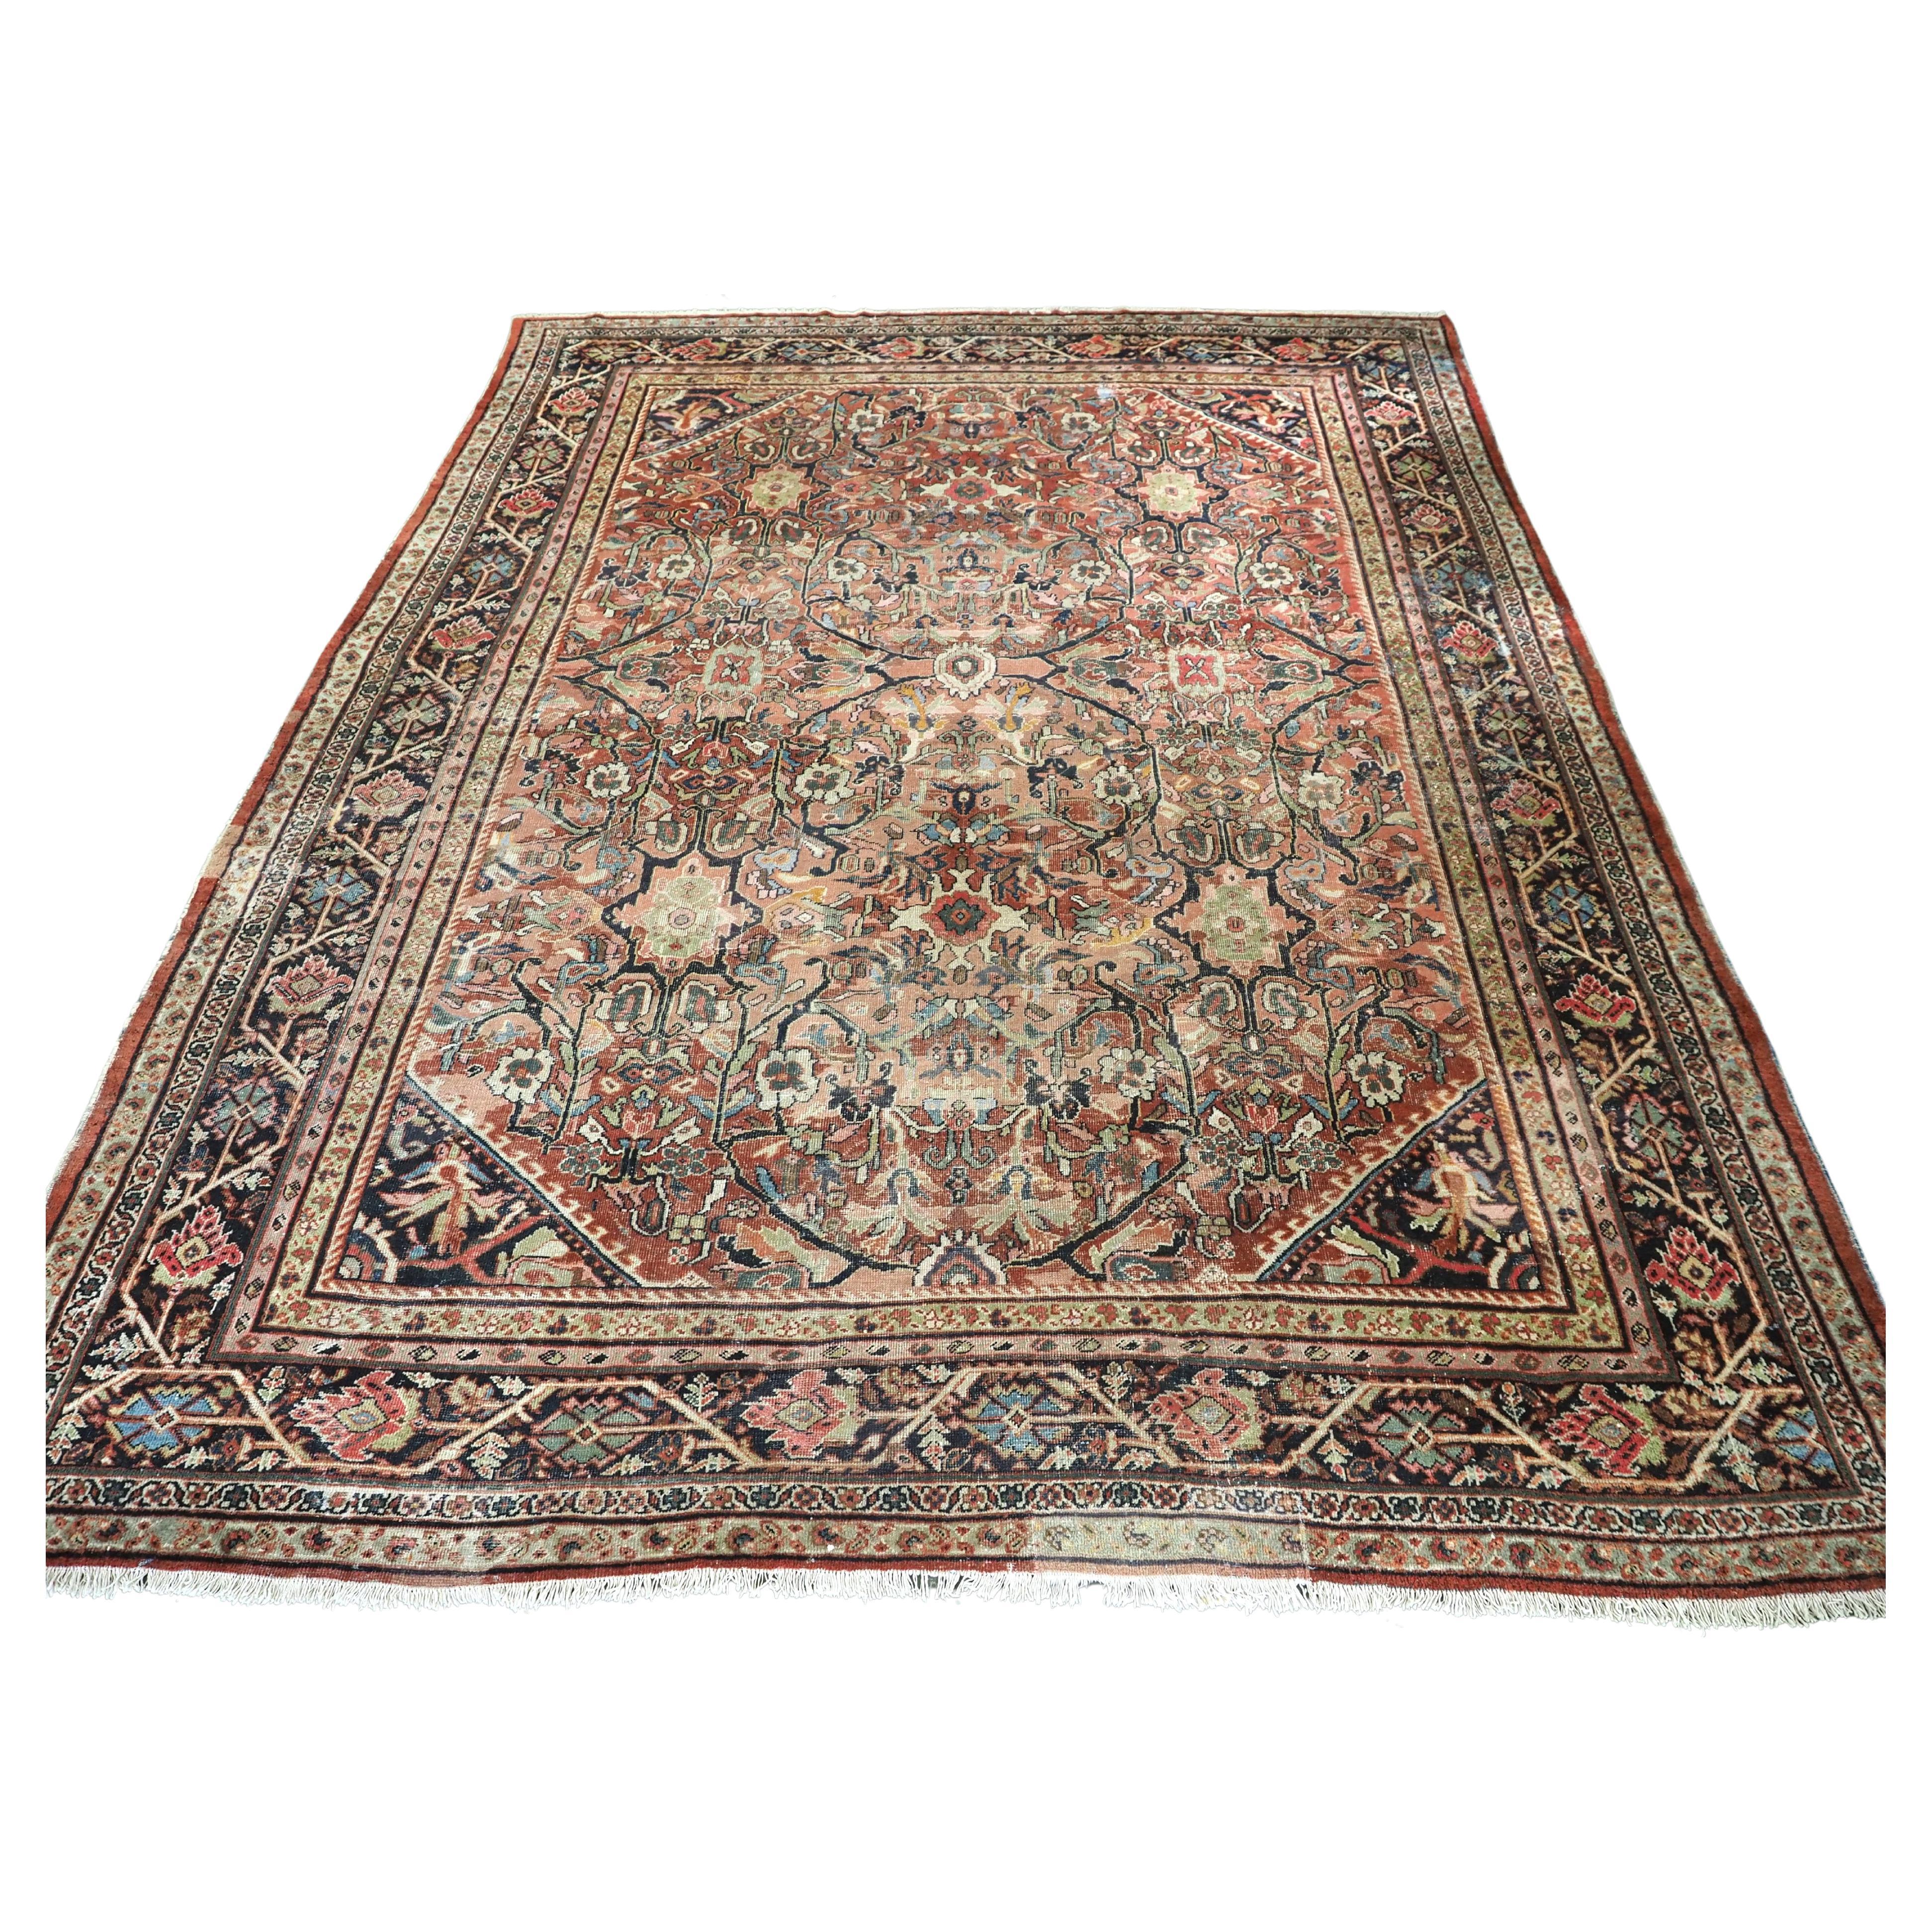 Antique Mahal carpet of very good large room size in pastel colours. Circa 1900.